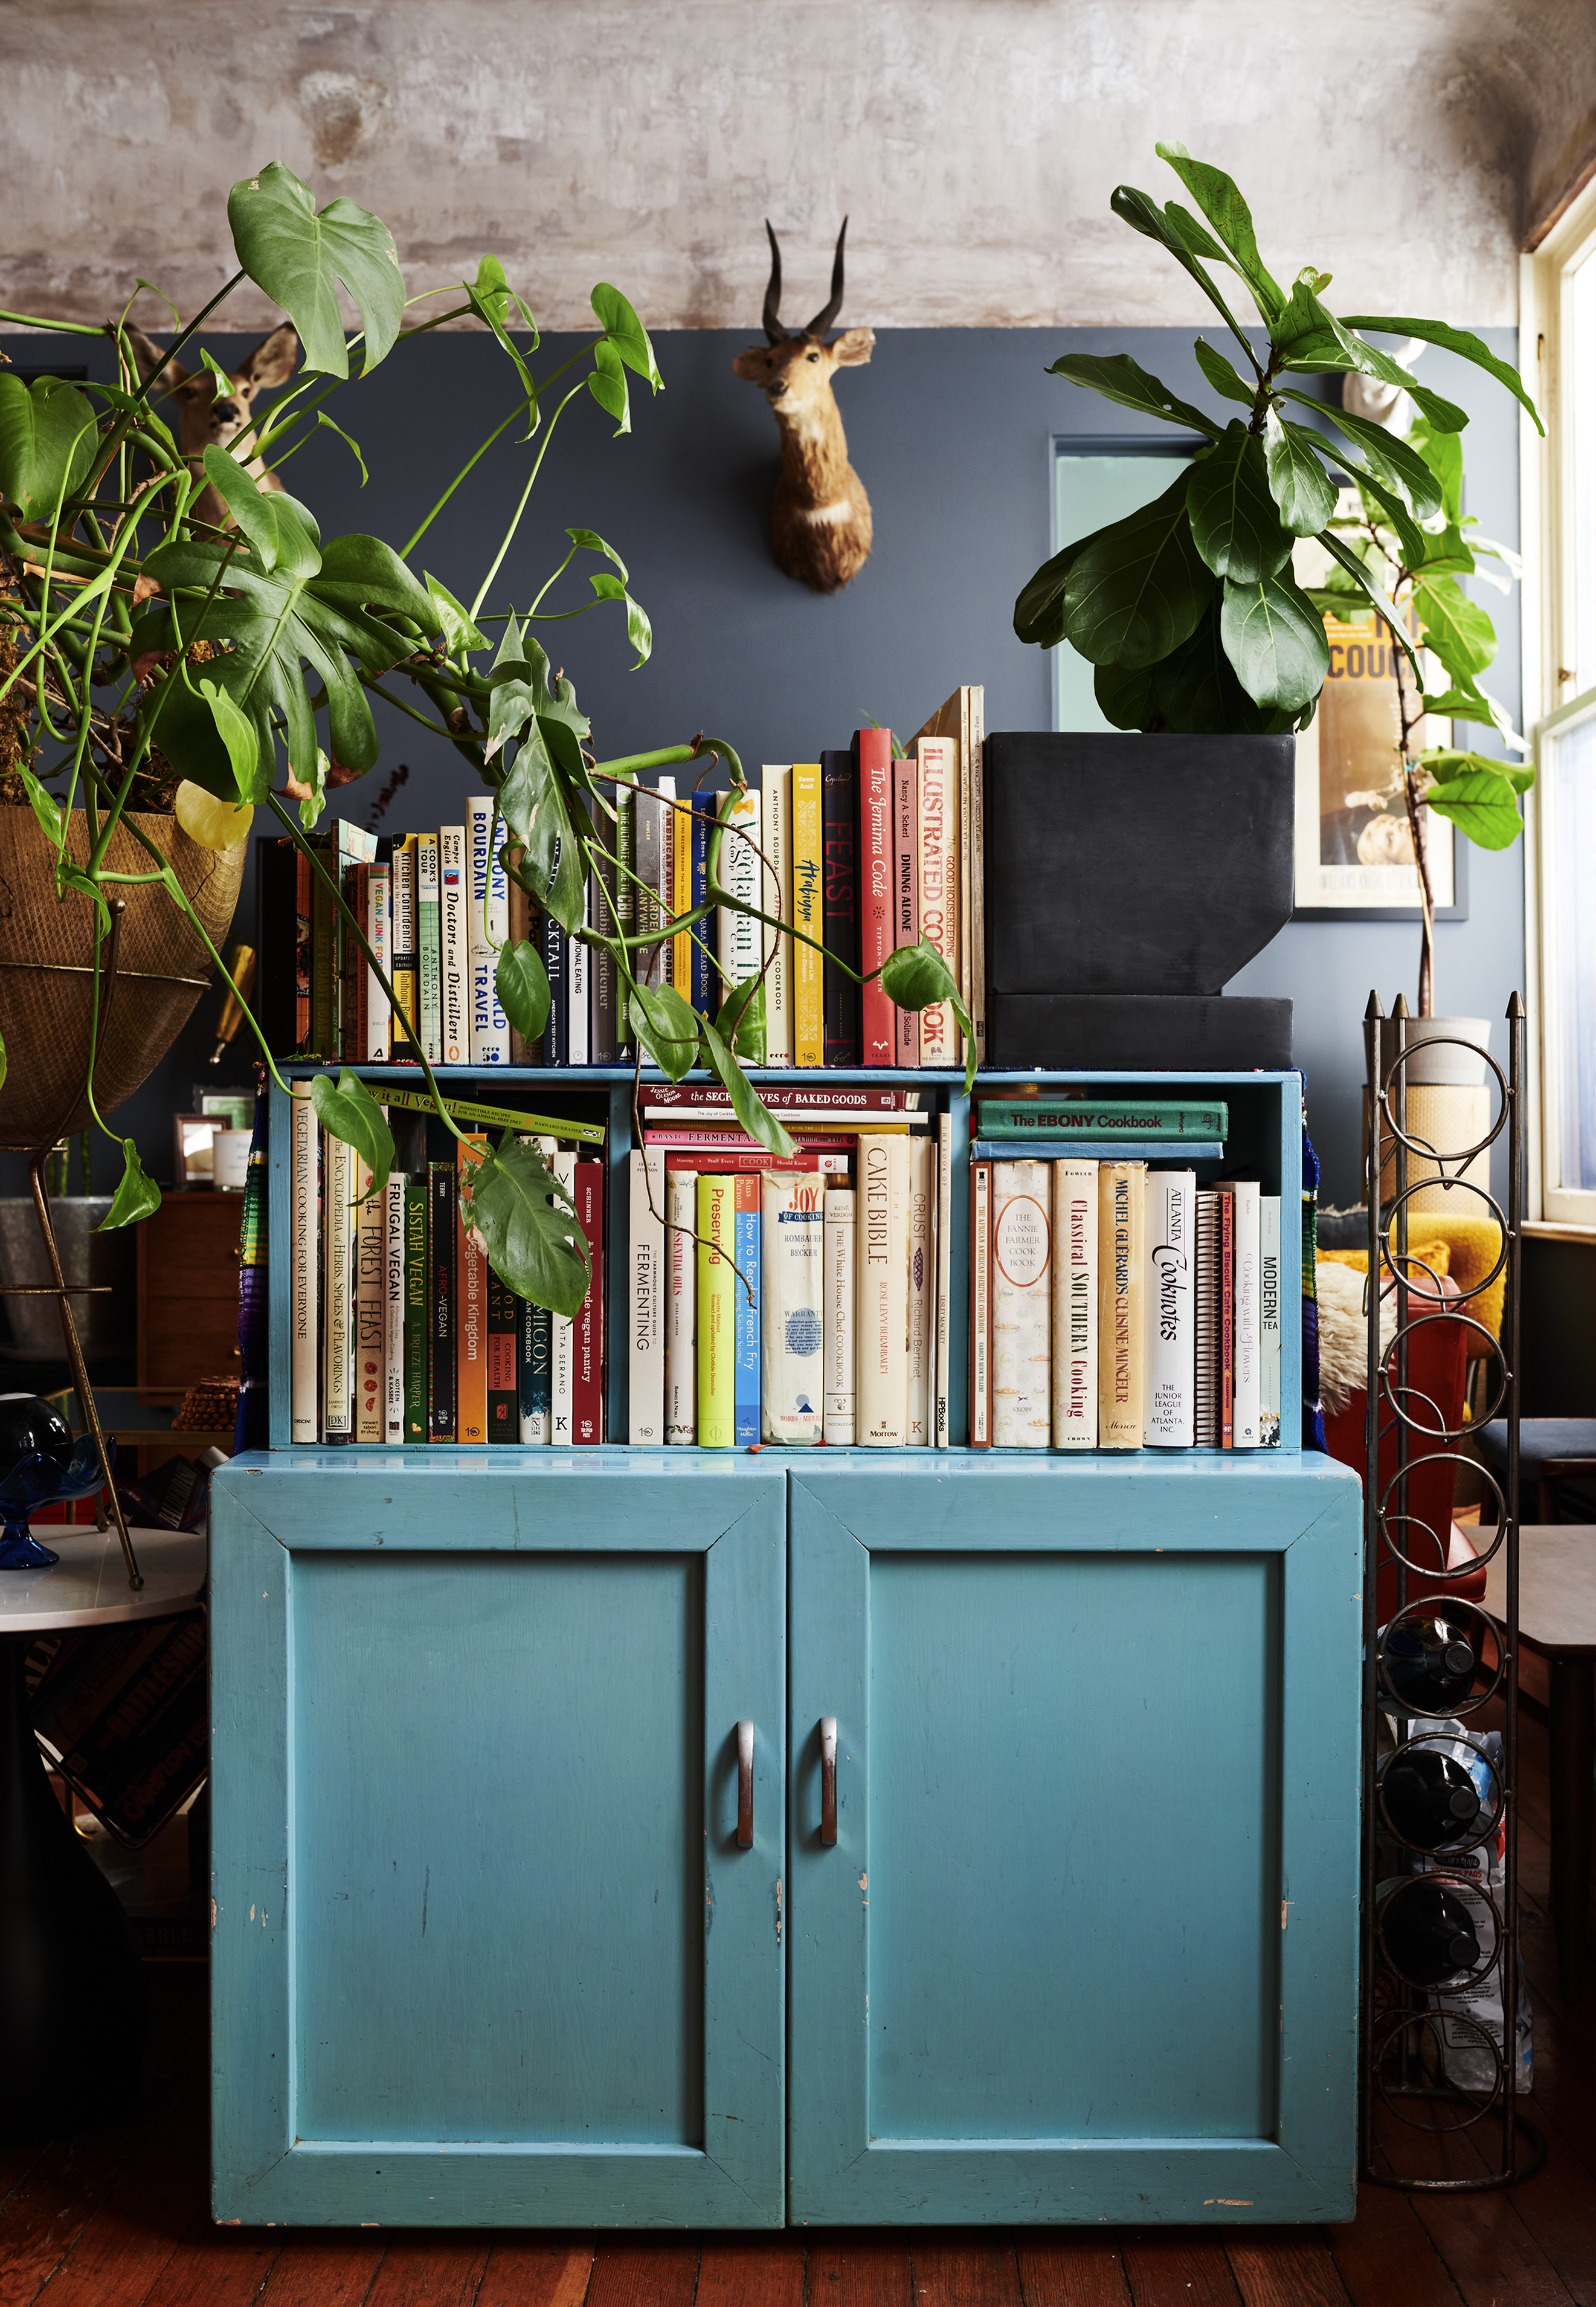 A blue wooden cabinet is topped with a variety of books. Plants are draped over and around the books, and a mounted animal head is on the wall behind.